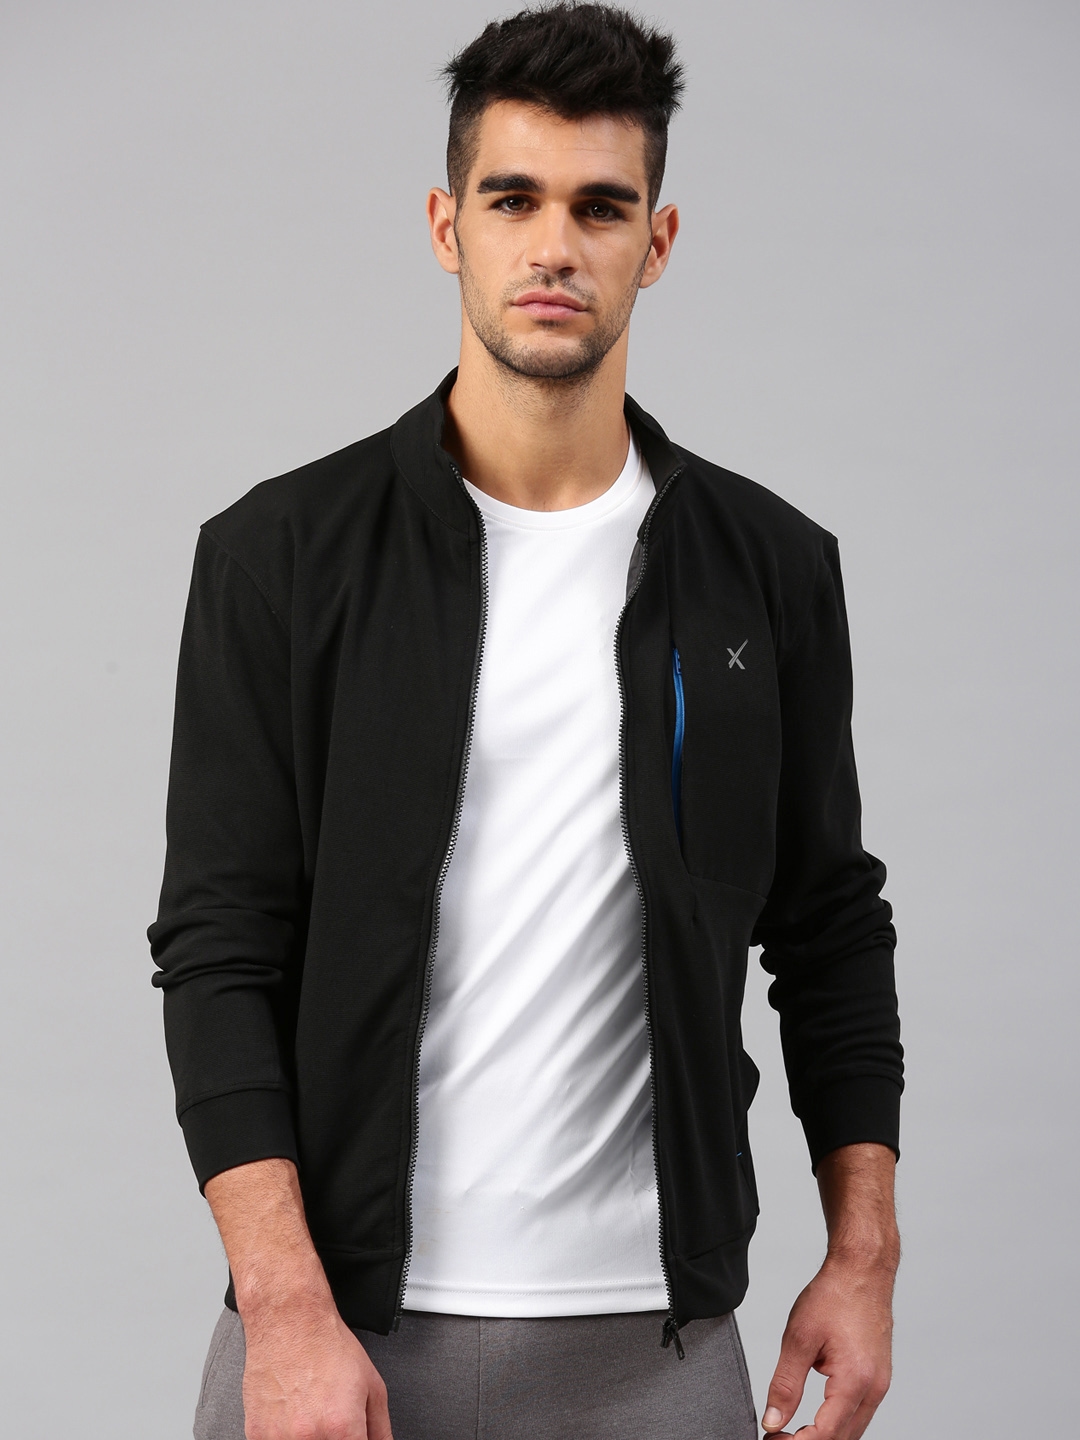 HRX Bomber Jackets for Men sale - discounted price | FASHIOLA INDIA-calidas.vn